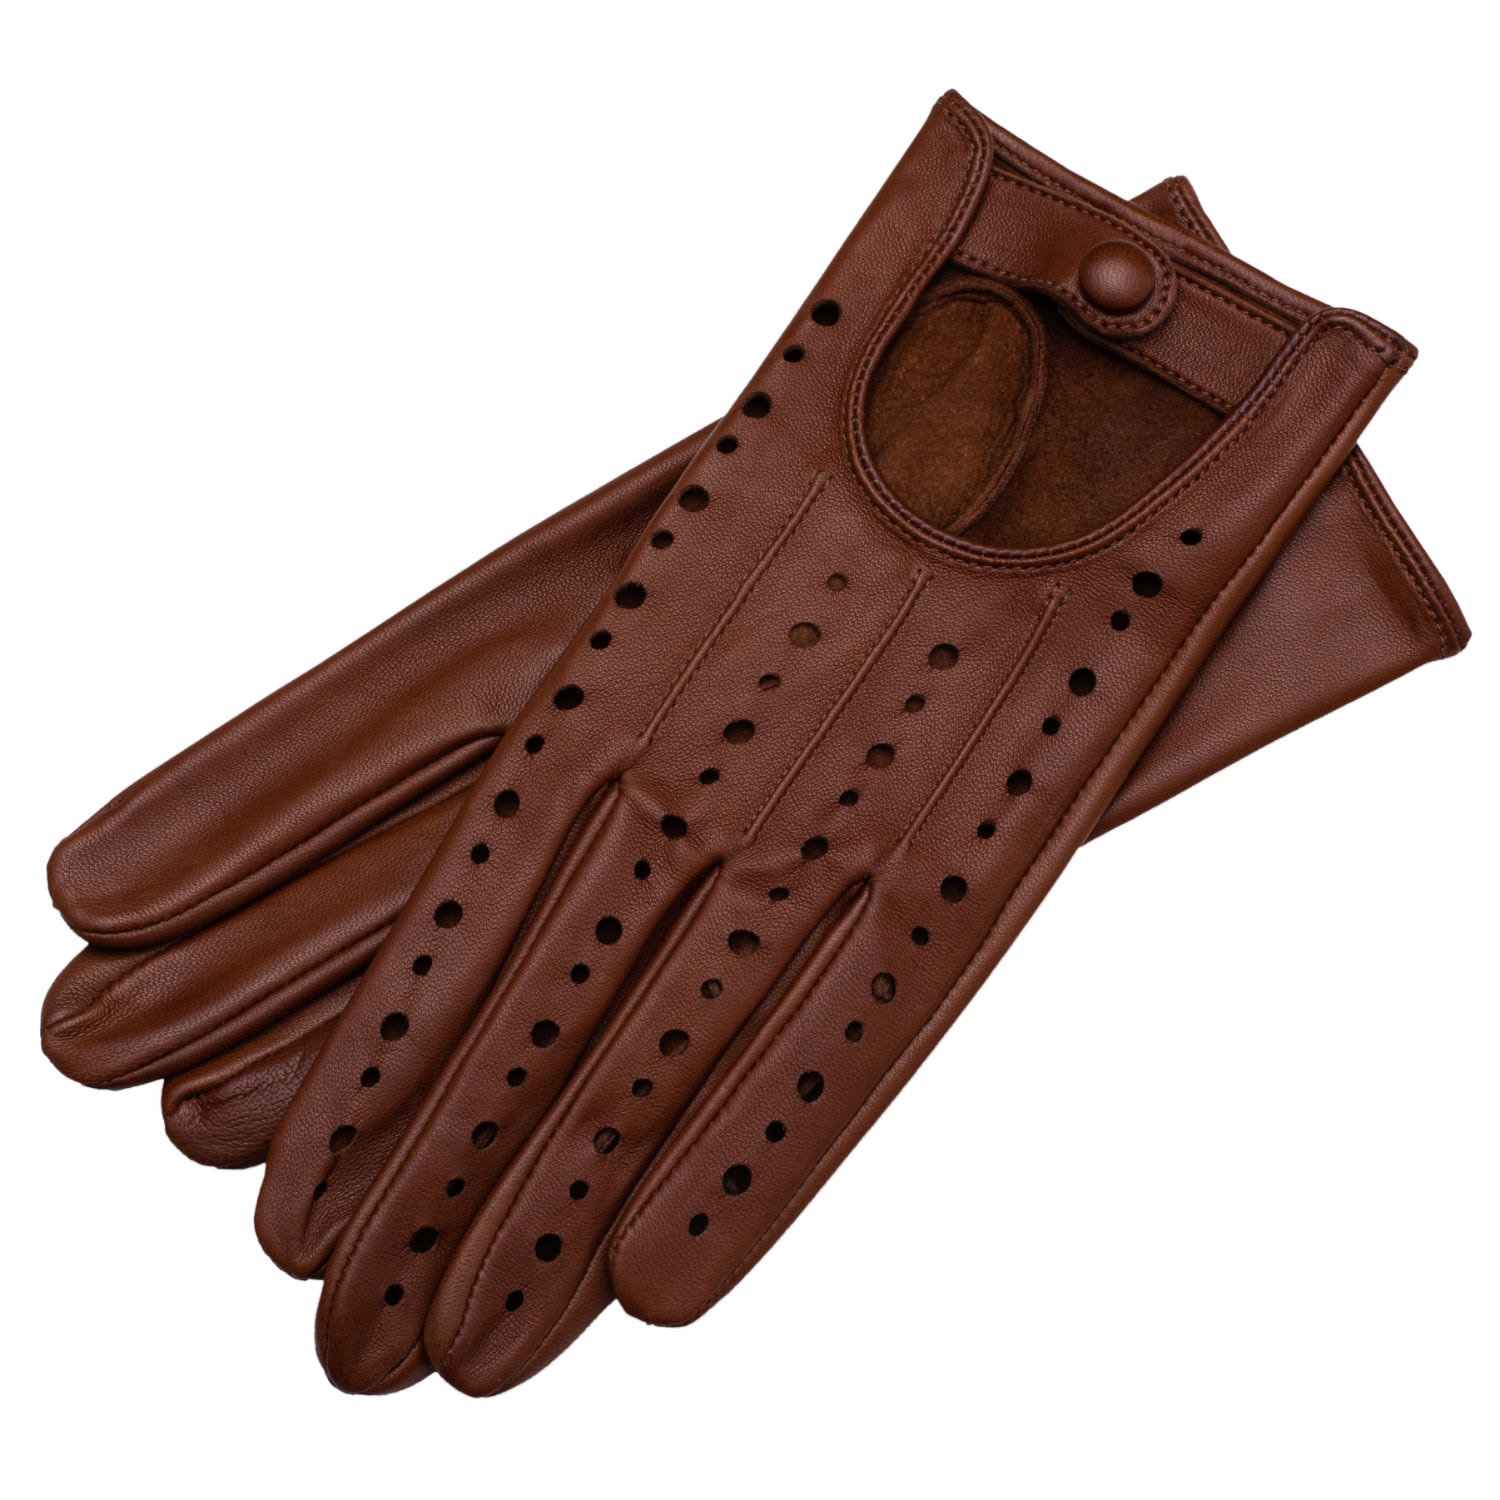 1861 Glove Manufactory Rimini - Women's Leather Driving Gloves In Saddle Brown